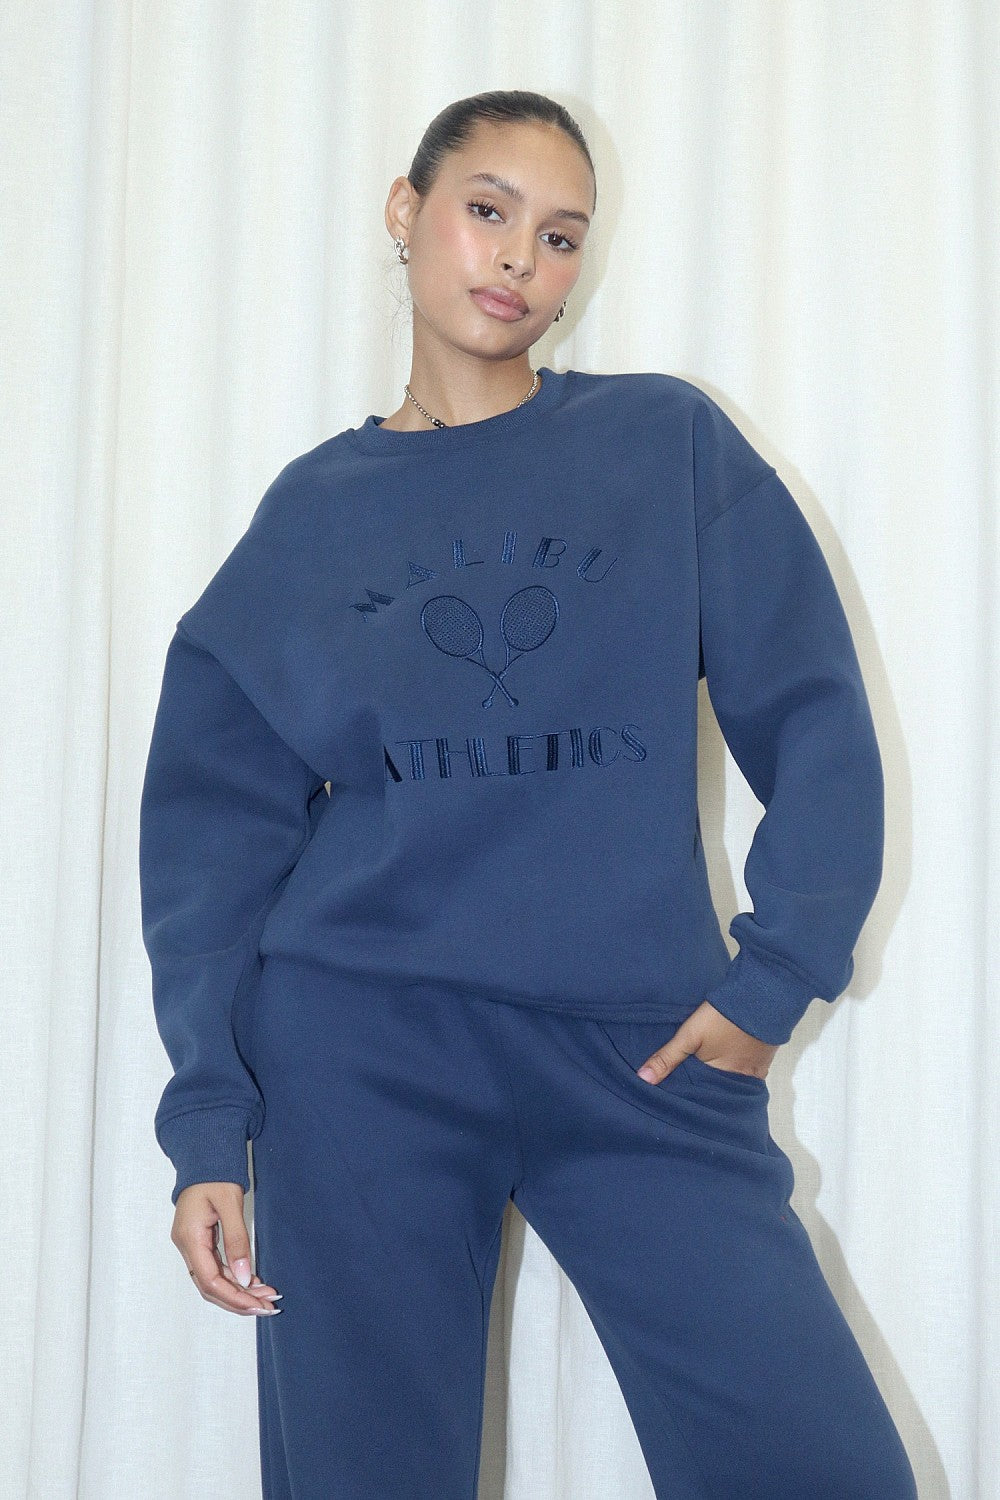 Oversized fleece-lined crewneck sweatshirt in navy.  Embroidered on the front with "Malibu Athletics" and rackets.  Front view.